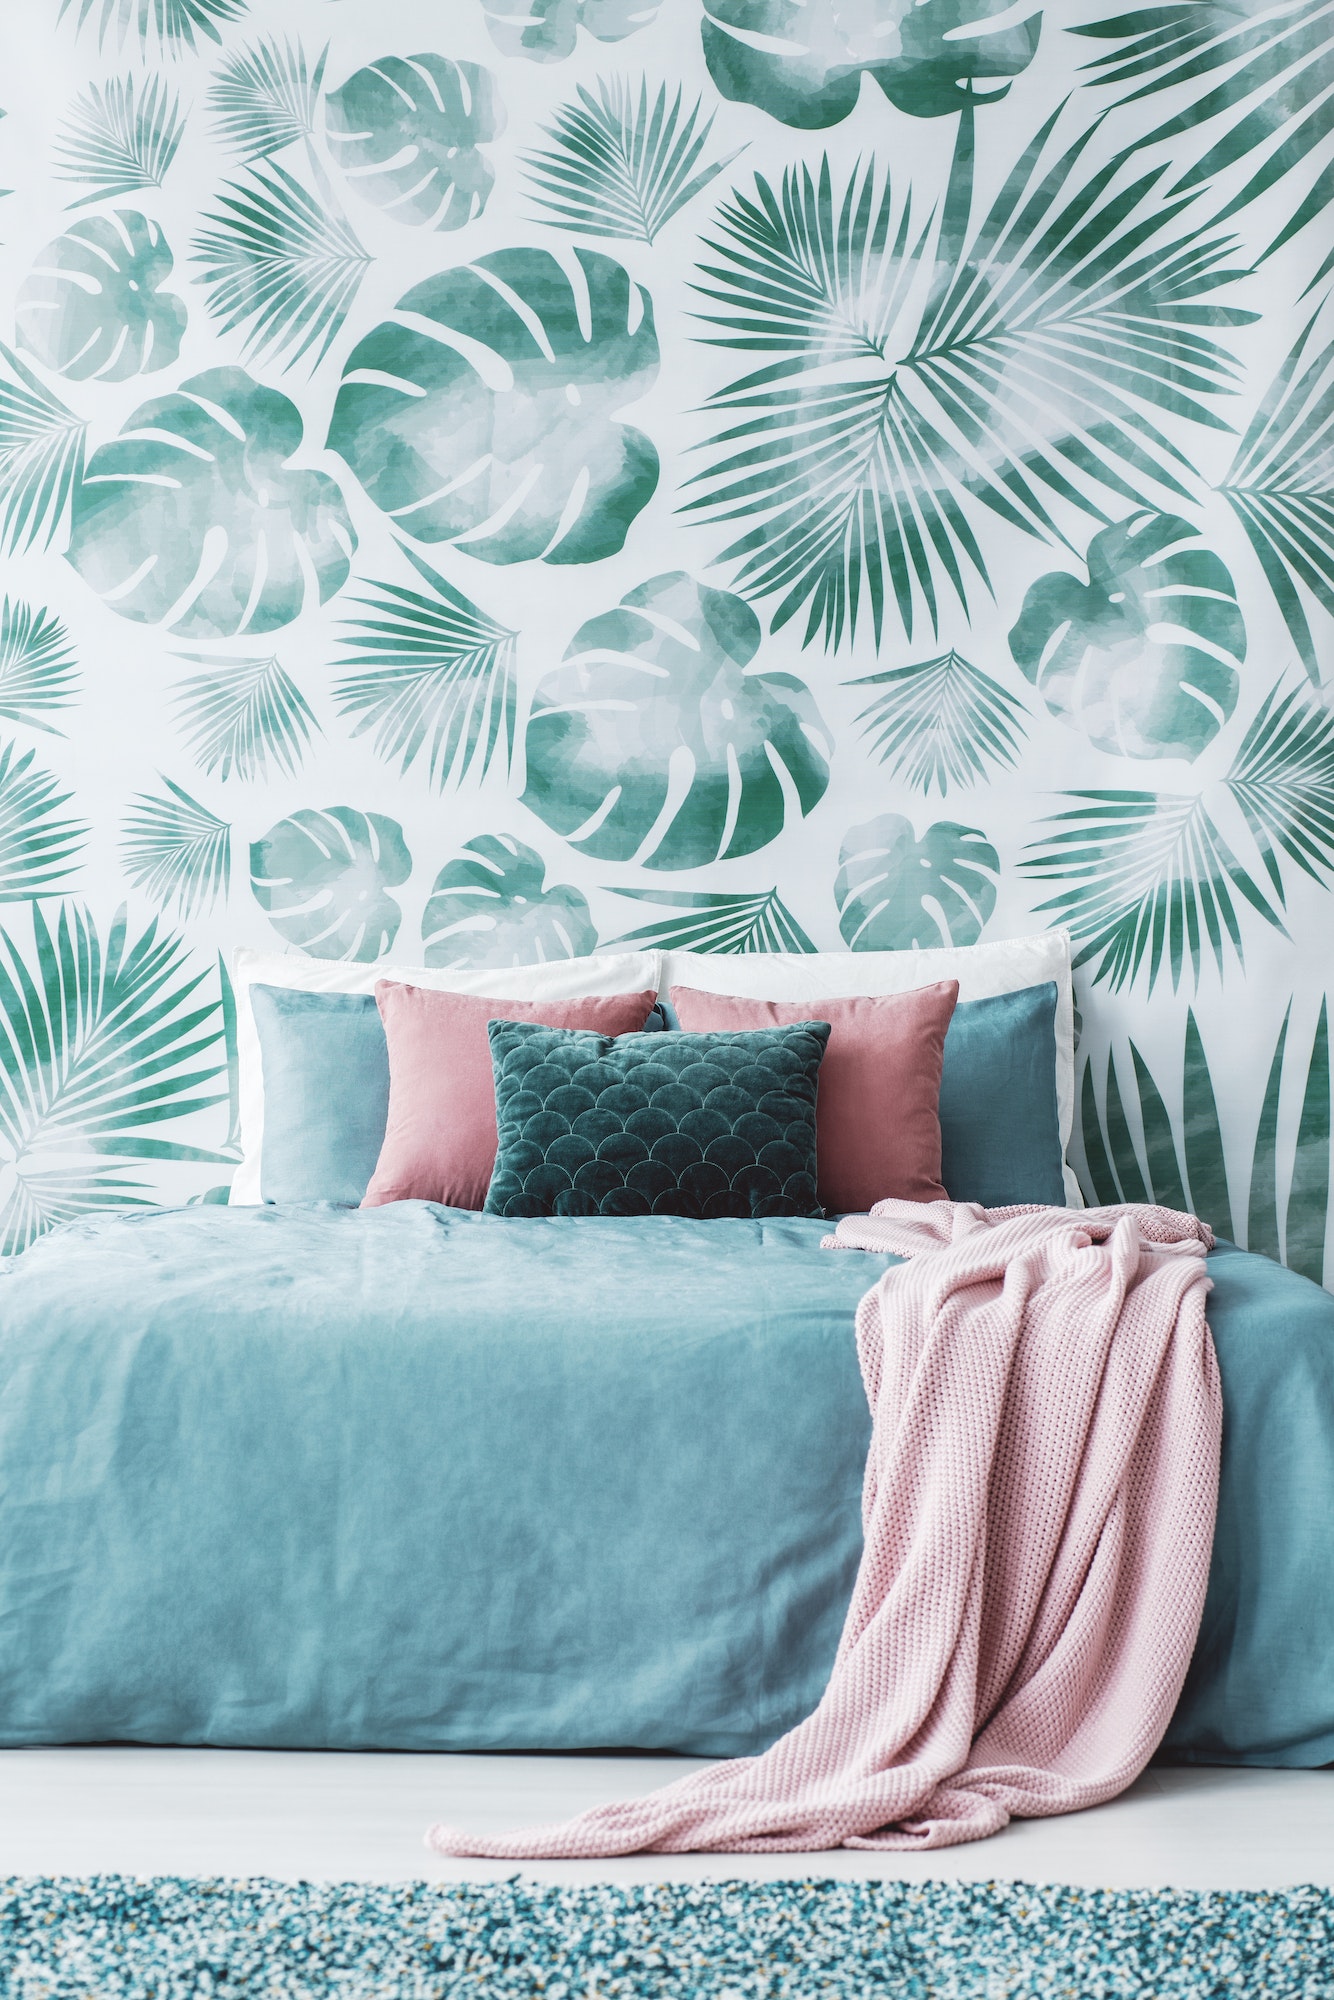 Some bold wallpaper ideas for your rooms